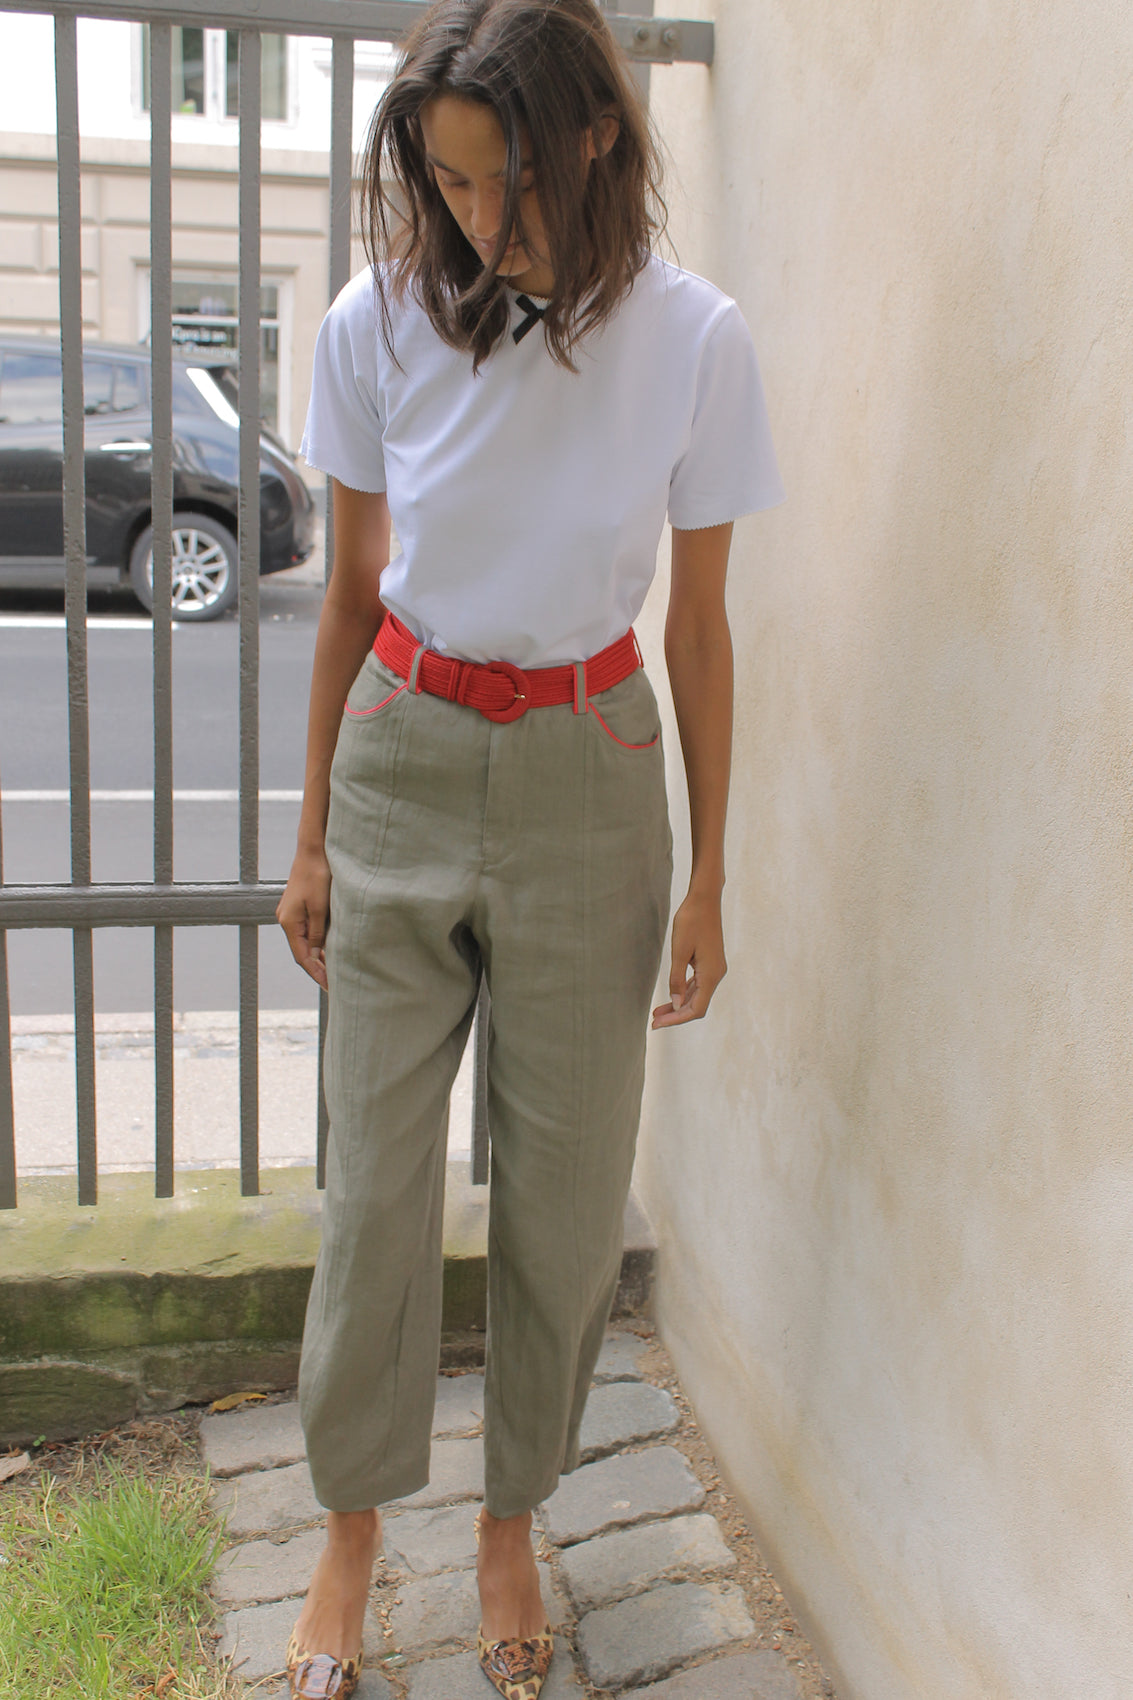 The Emma Pants in Khaki Linen. The pants feature cargo details on the side and large pockets with piping details in a contrasting color. Easily modify the shape of the pants with a button adjustment.  Style them with a t-shirt, blouse, or a matching Emma Jacket in Khaki.  Also available in Orange, Pink and Navy.  Material: 100% linen. Lining: 100% viscose.  The model is 175cm (5'9") and is wearing a size S.